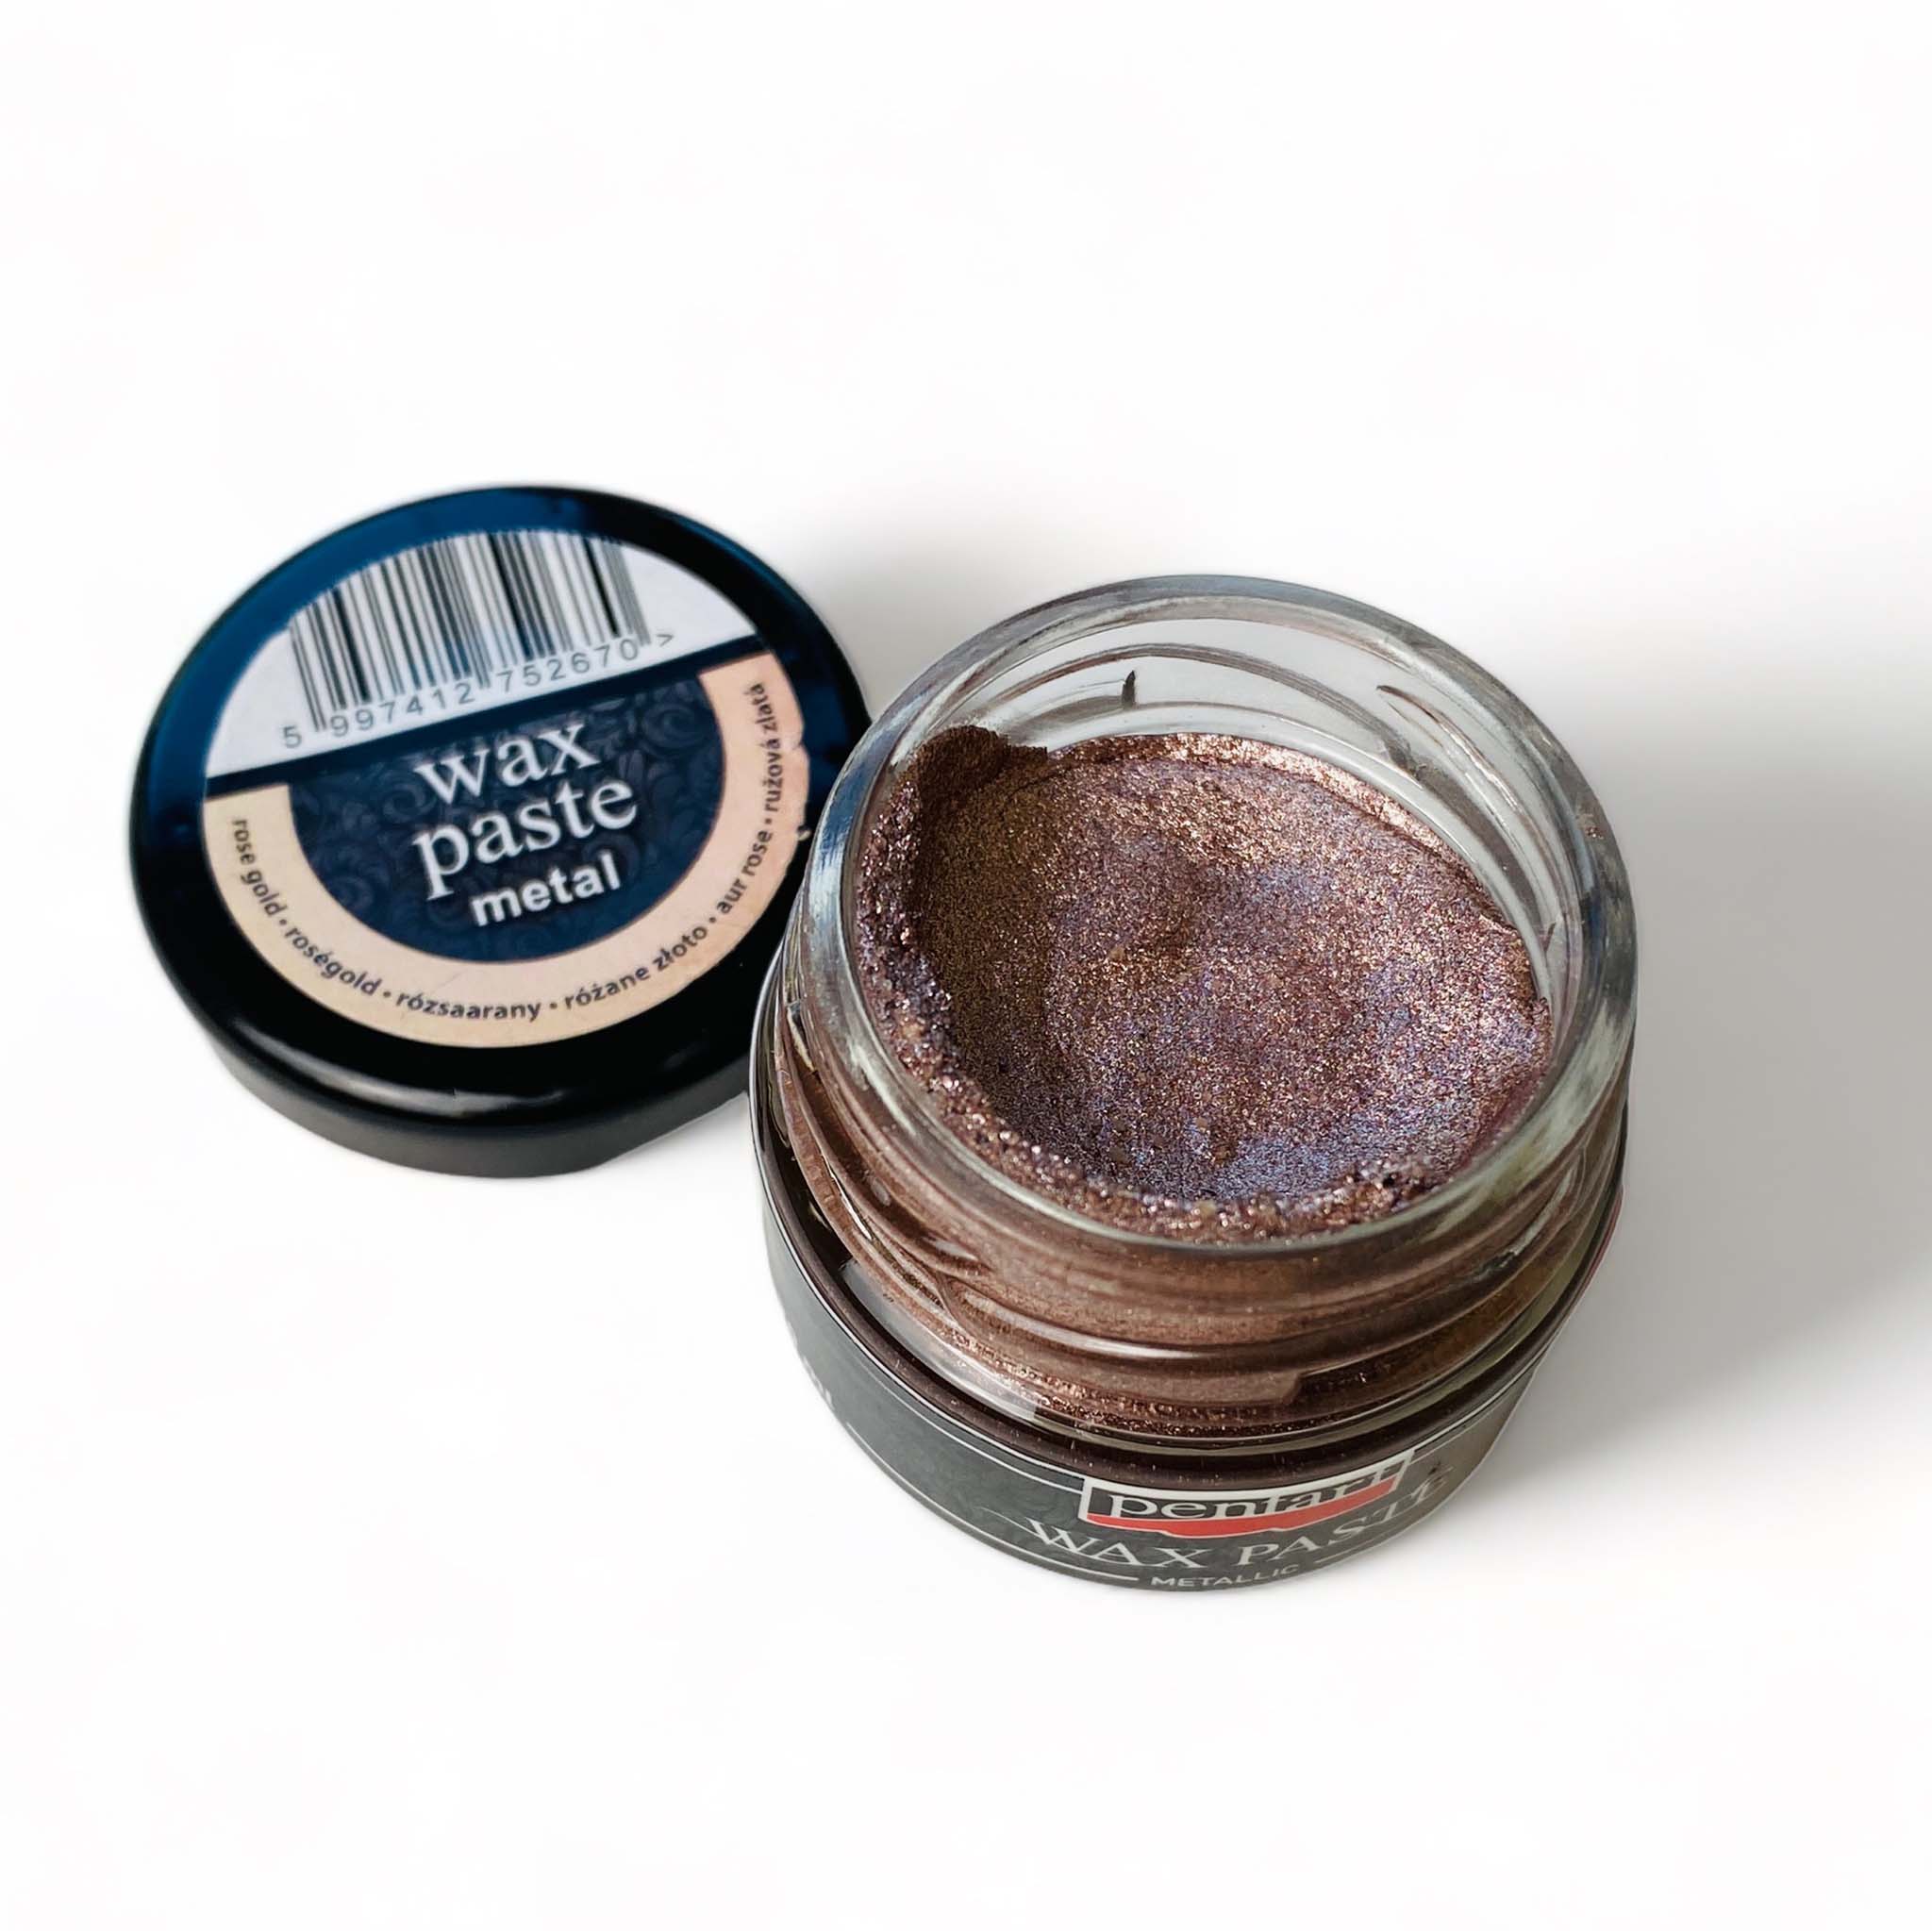 An open jar of a 20ml/0.68 ounce jar of metallic Rose Gold Wax Paste by Pentart is against a white background.